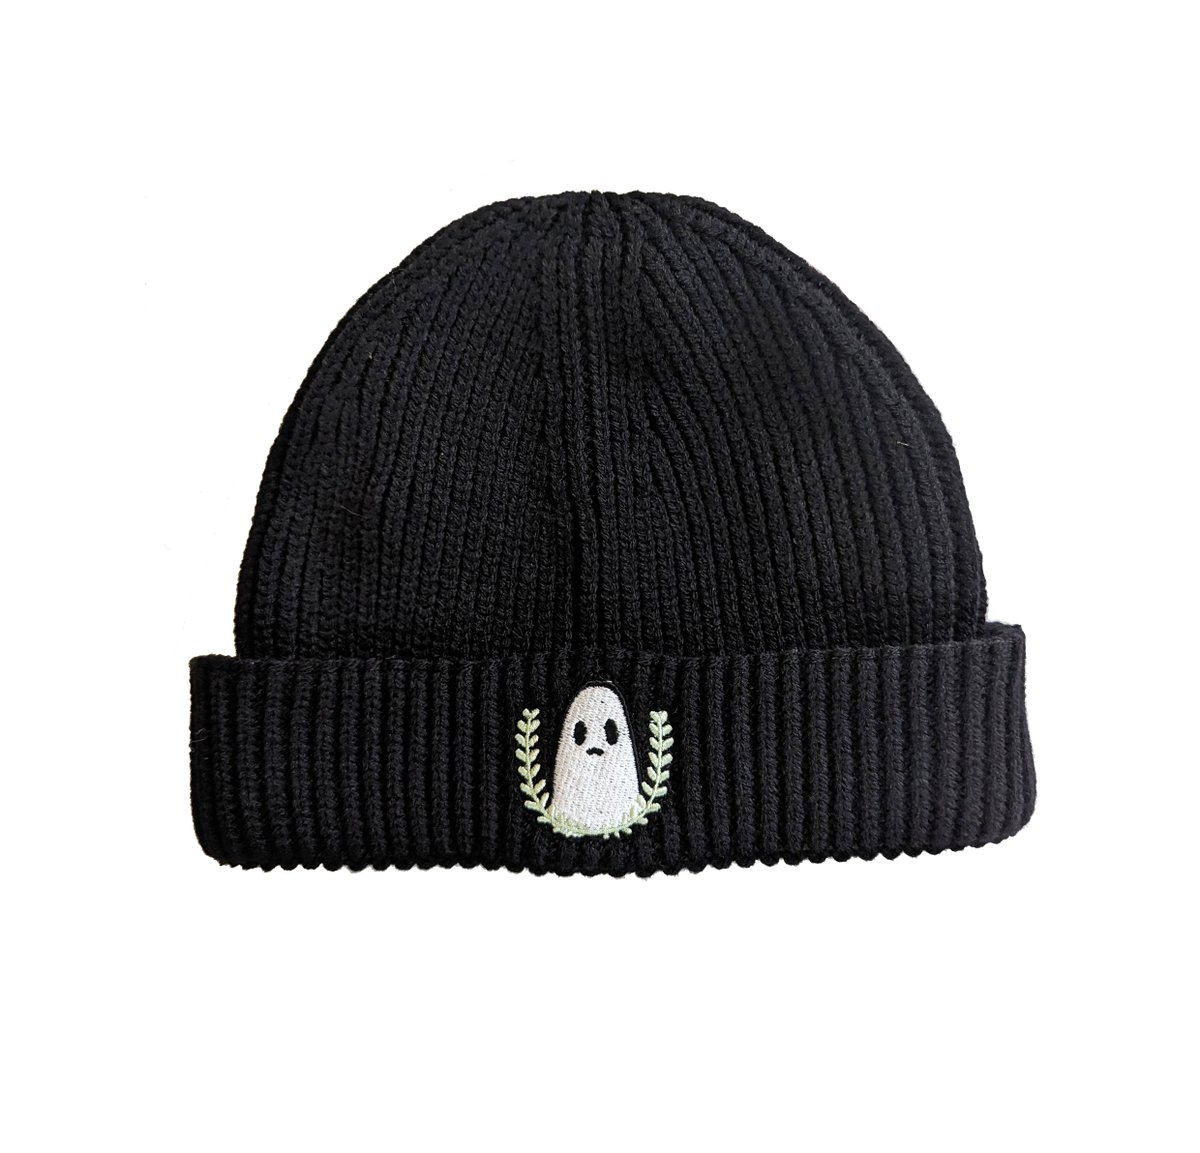 ⭐  Hey pals! Just a heads up - There's 20% off orders over £20 on the store ⭐ And there's still a few beanies!!!! Check 'em out here - thesadghostclub.com